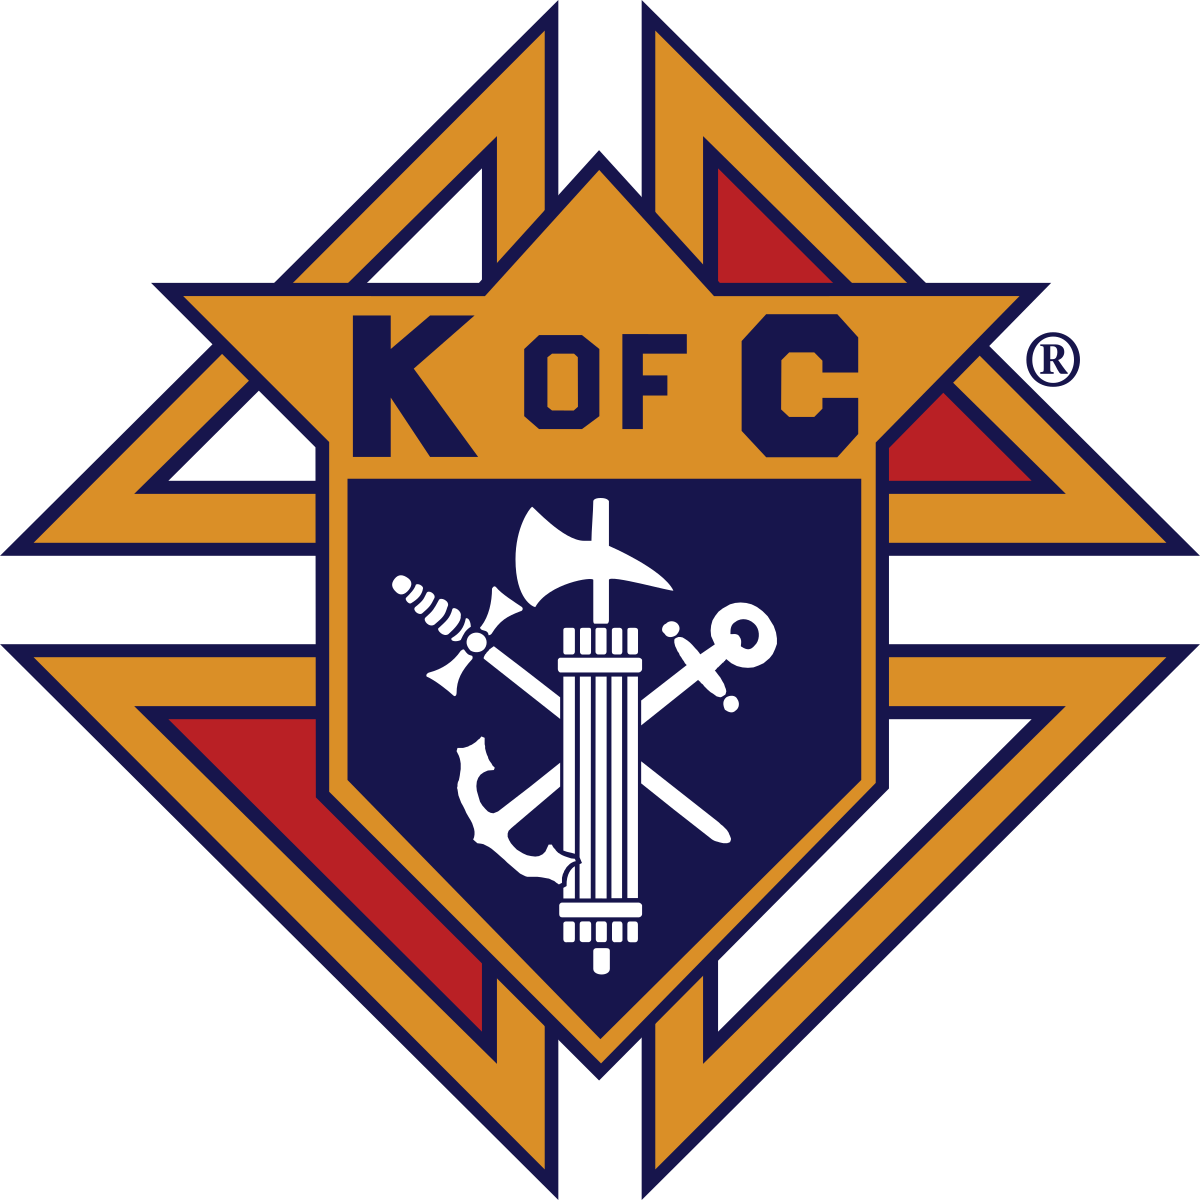 The official logo of the Knights of Columbus with a badge depicting the letters K of C and below a hammer, sword and an anchor